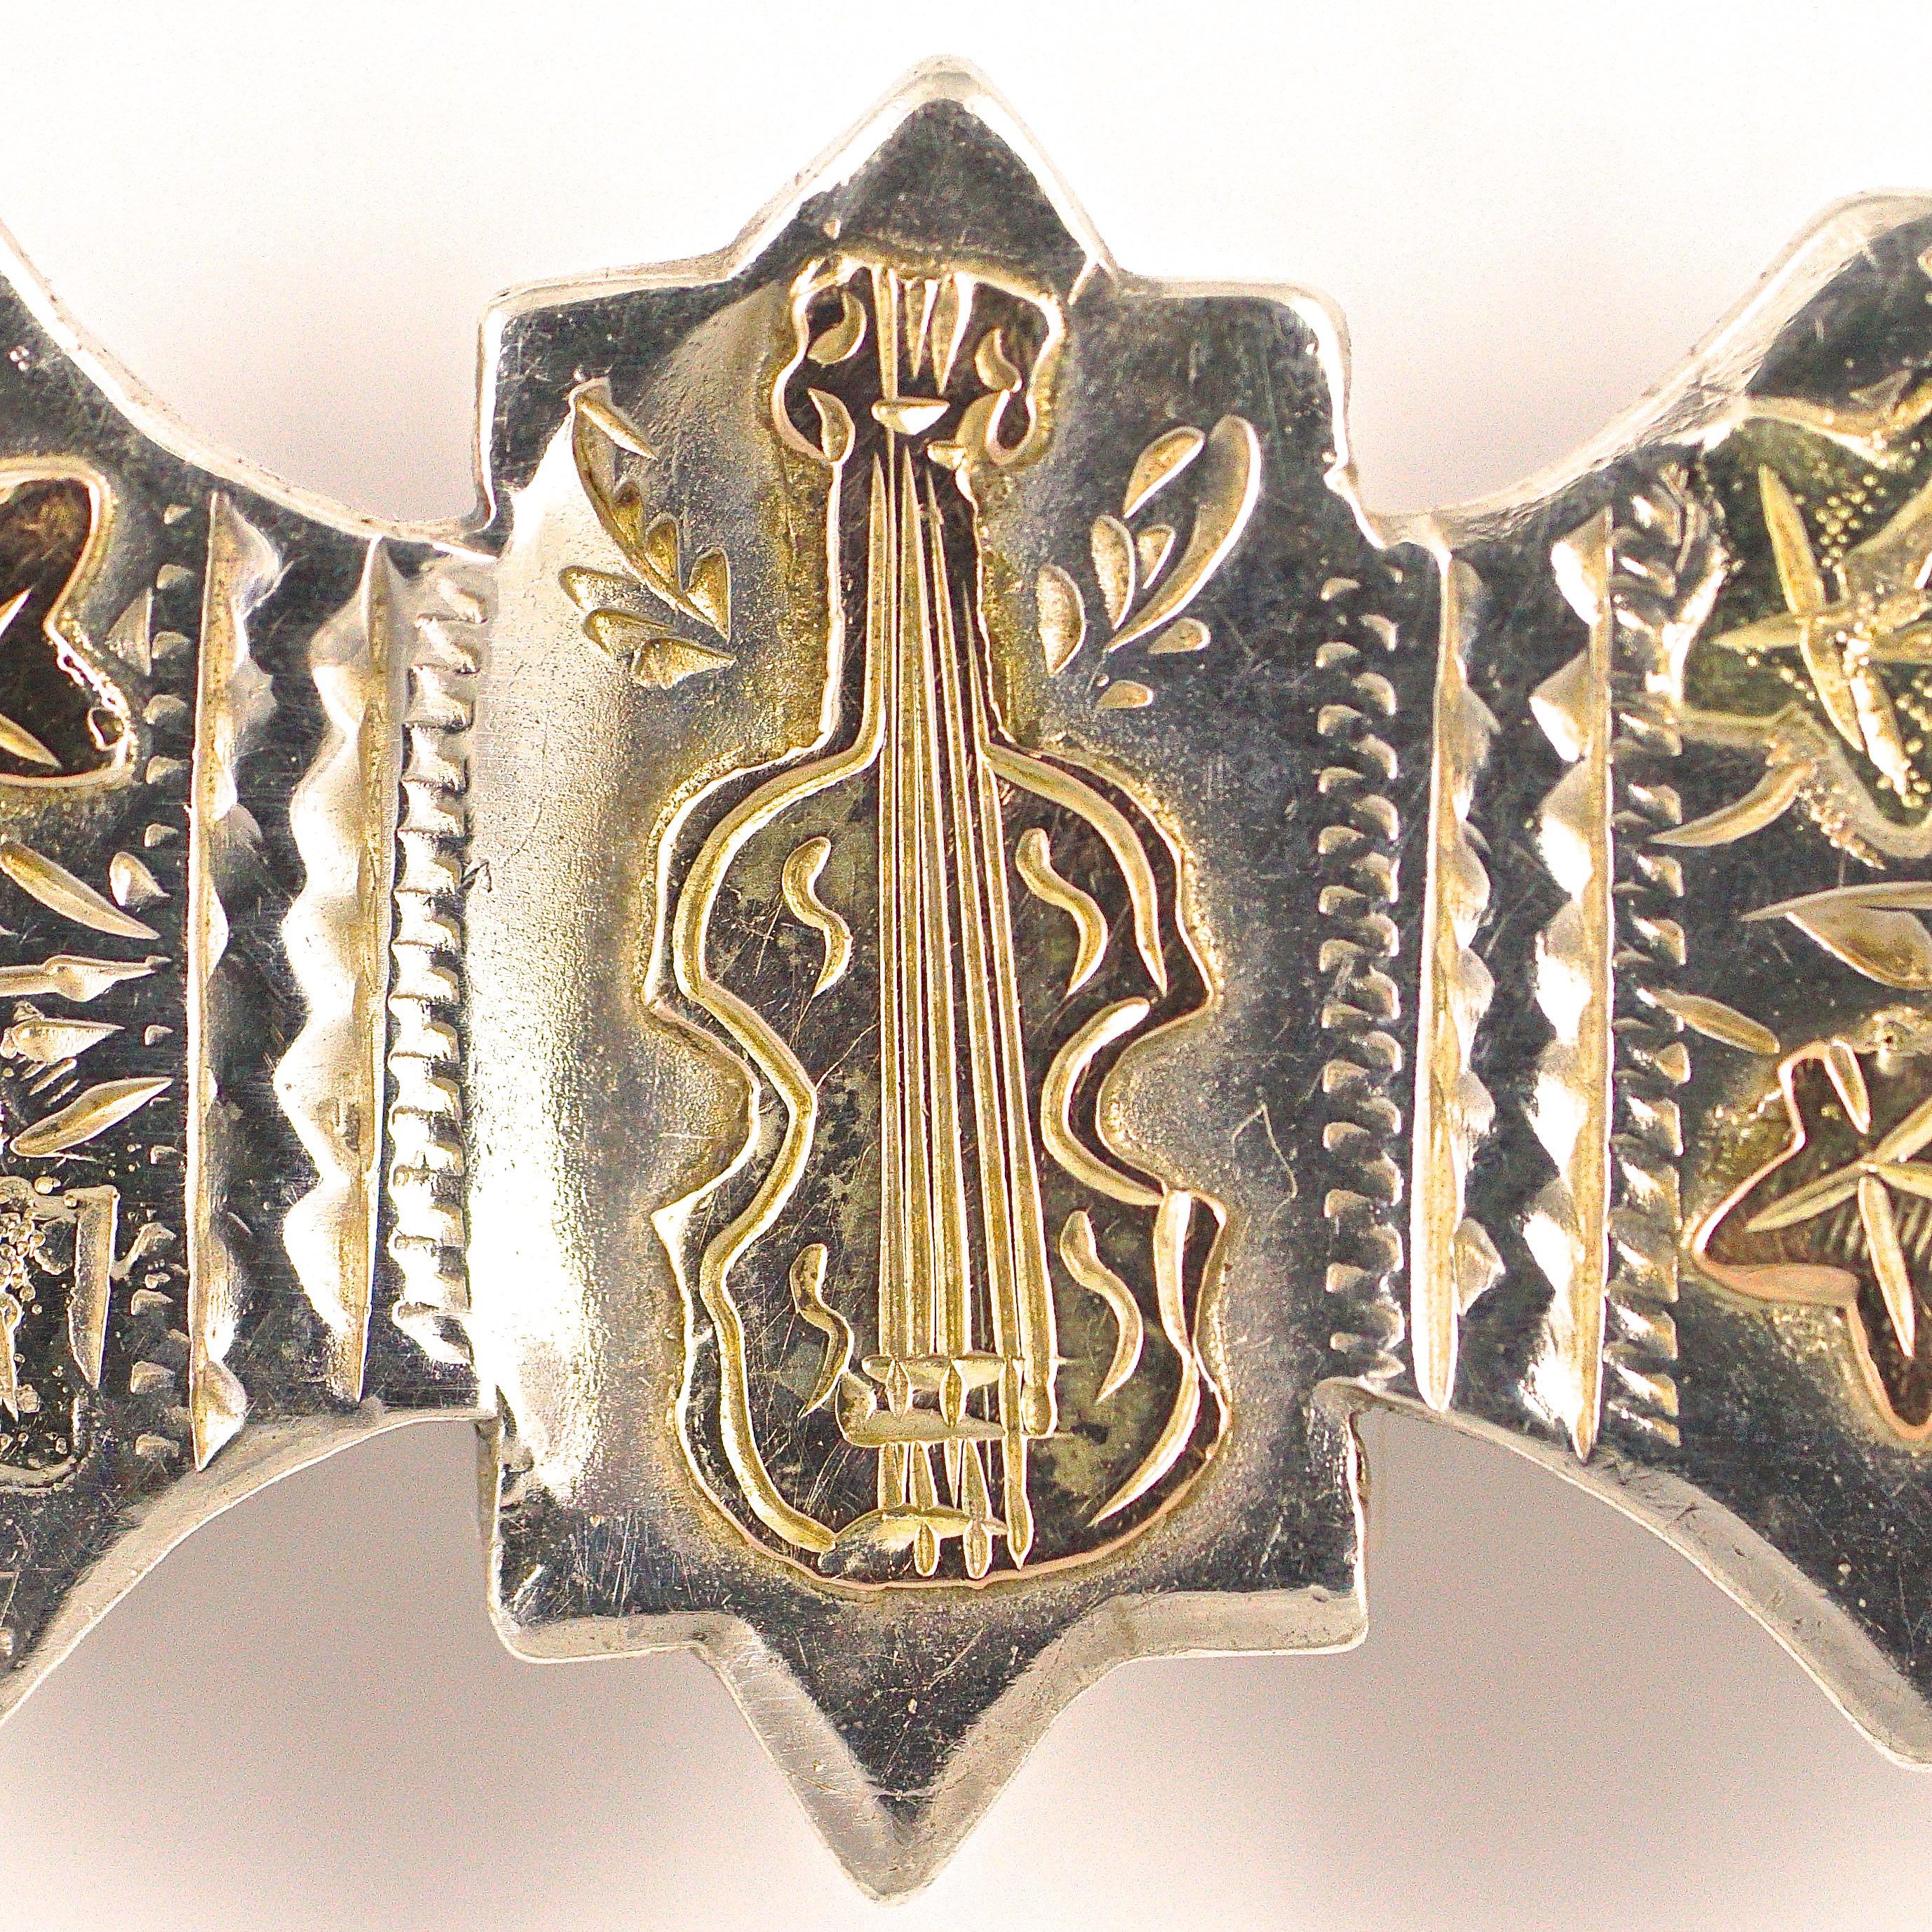 Wonderful Victorian hand chased ornate sterling silver bar brooch, featuring a violin and ivy leaves gilded in rose gold and yellow gold. Measuring length 4.25cm / 1.67 inches by width 1.2cm / .47 inch. The brooch has English hallmarks, stamped with